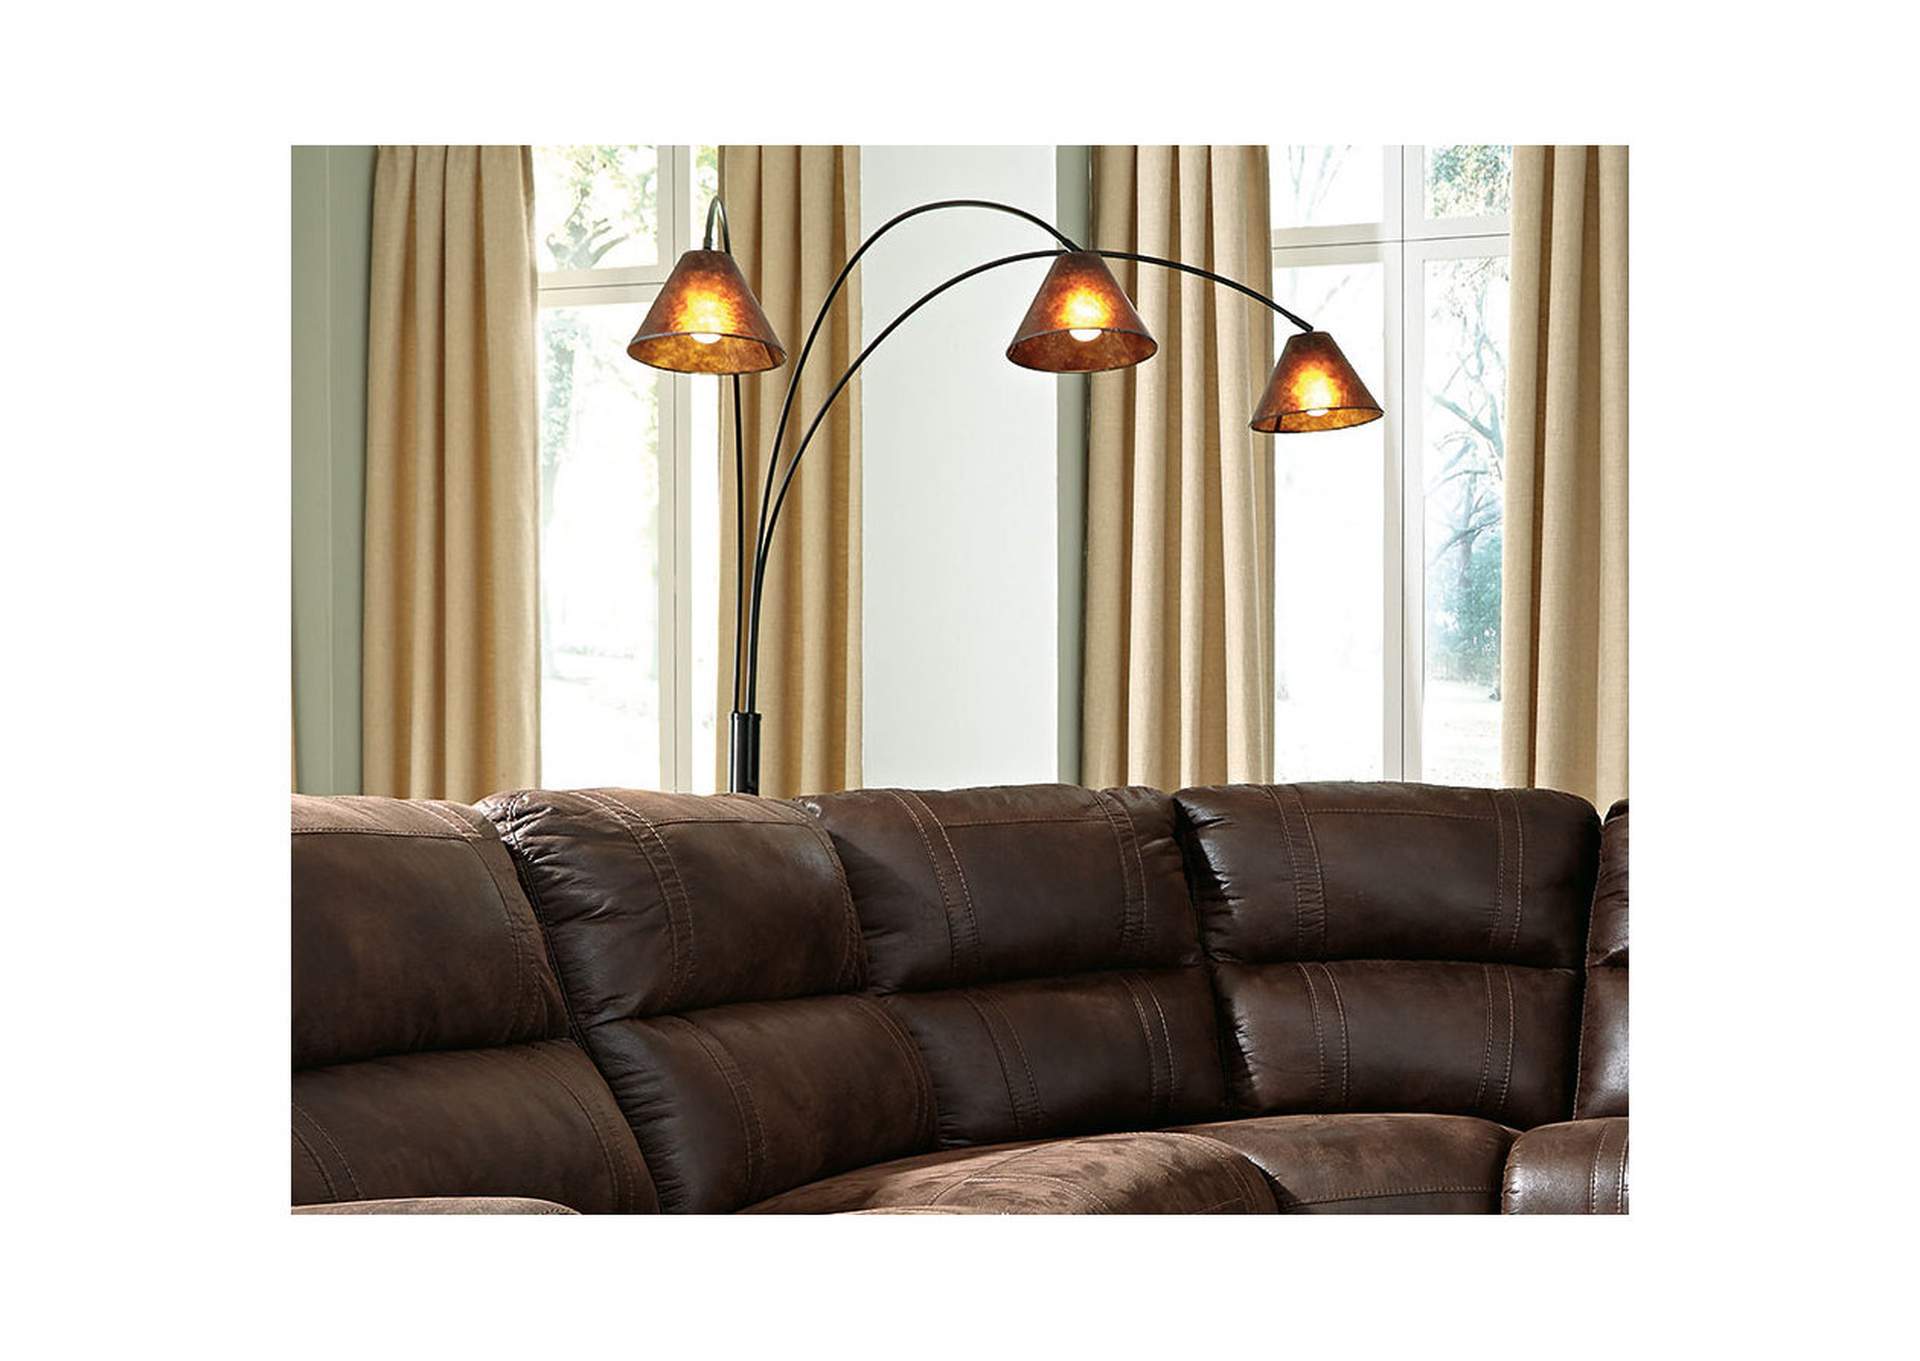 Sharde Floor Lamp,Direct To Consumer Express